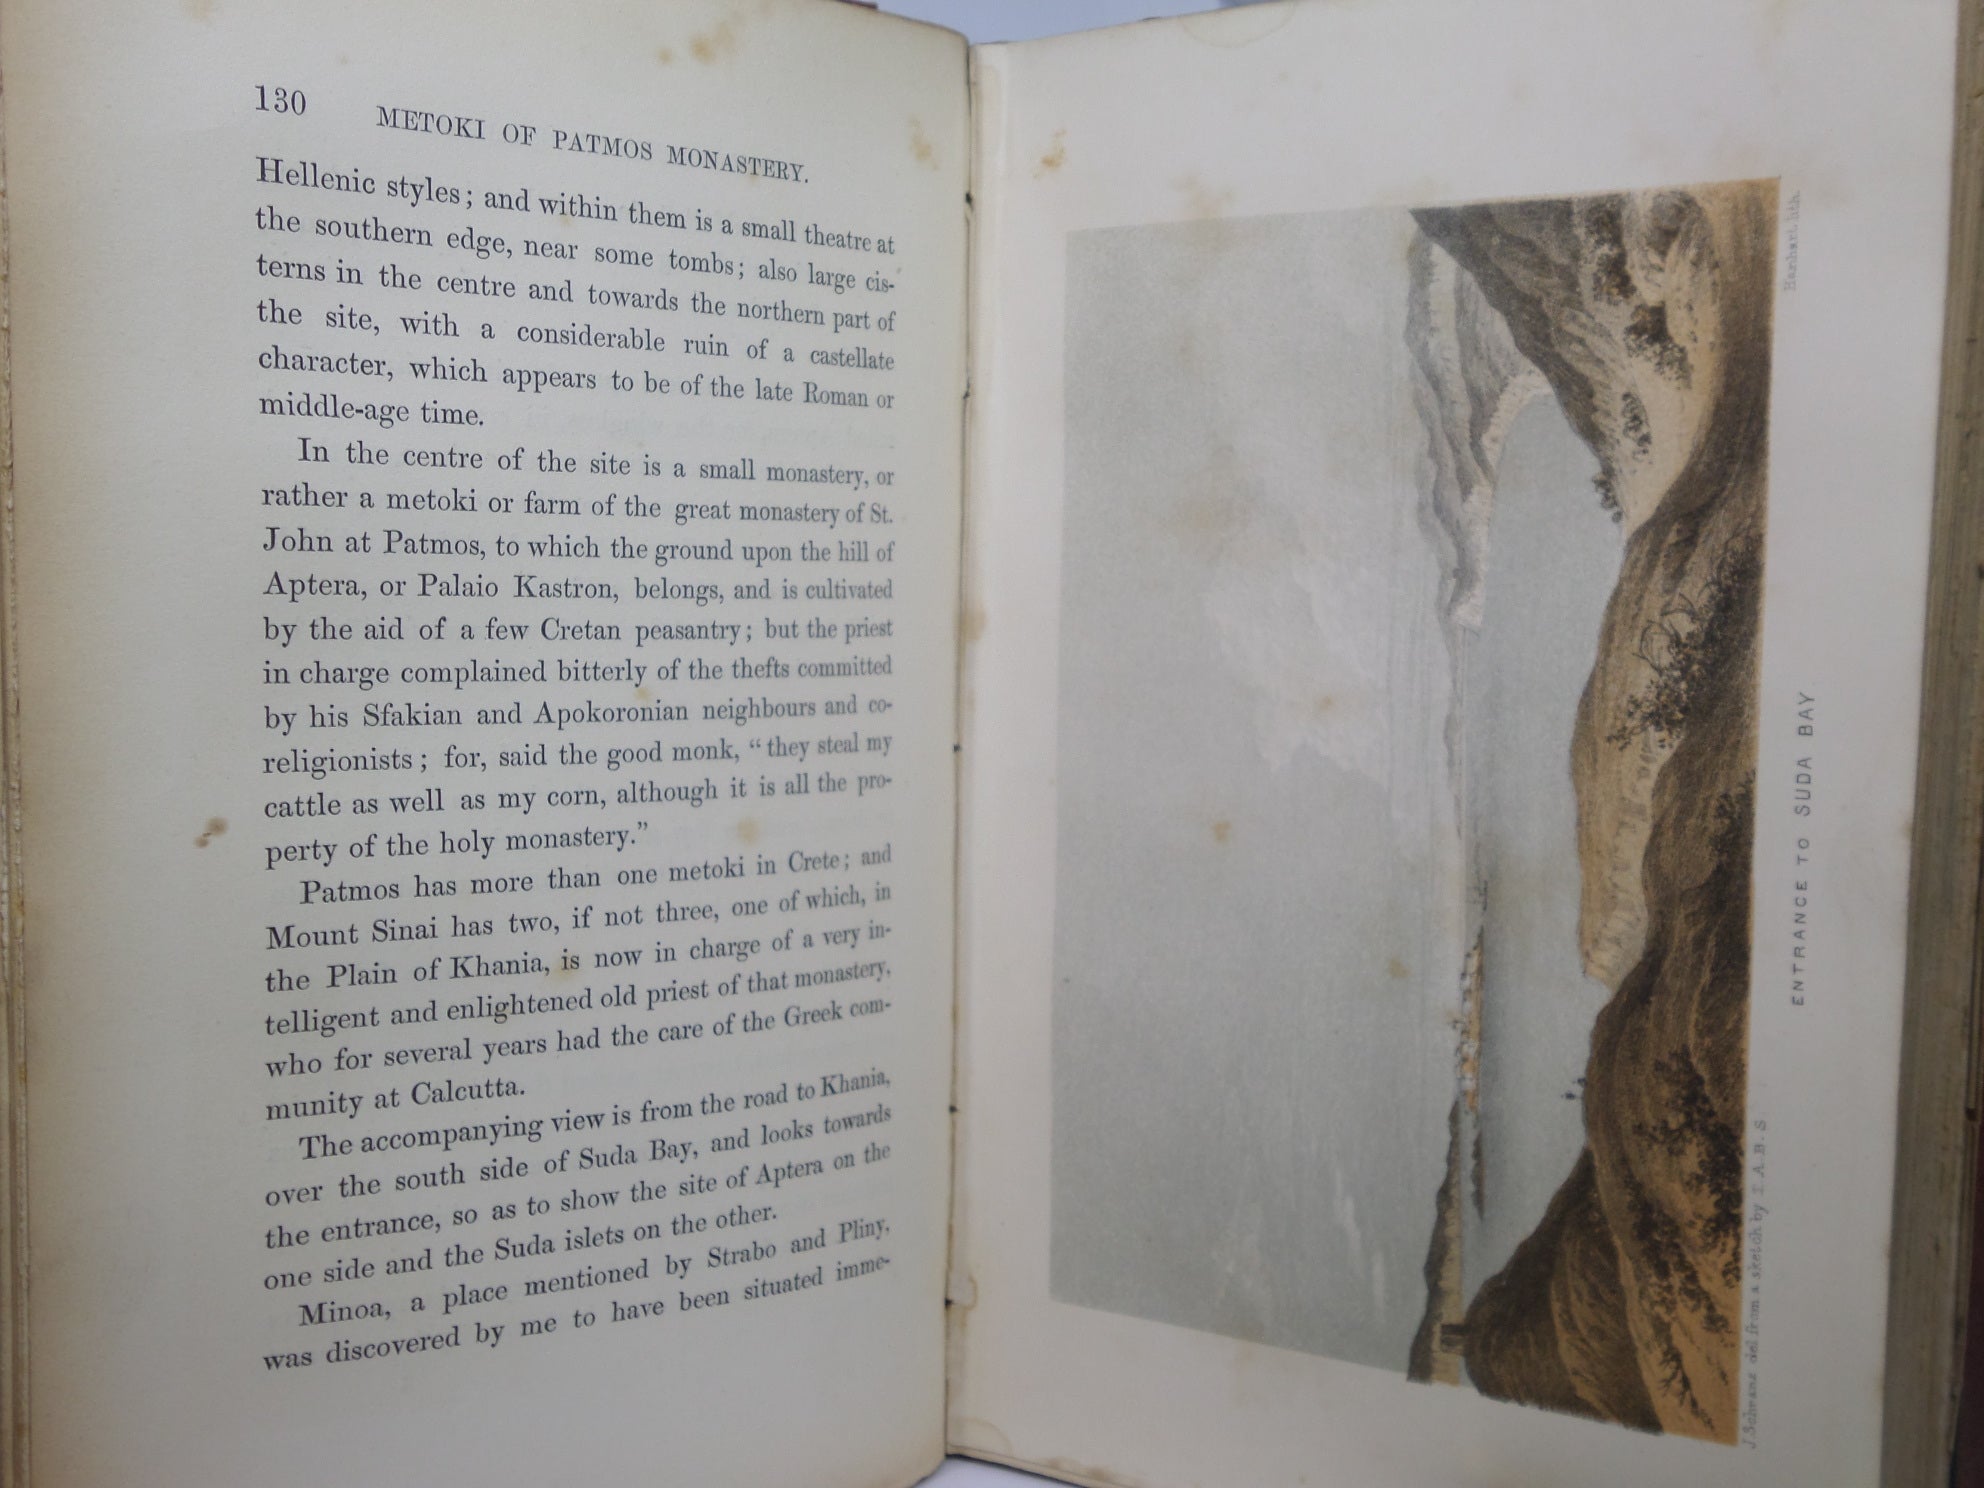 TRAVELS AND RESEARCHES IN CRETE BY T.A.B. SPRATT 1865 FIRST EDITION, AUTHOR'S PRESENTATION COPY